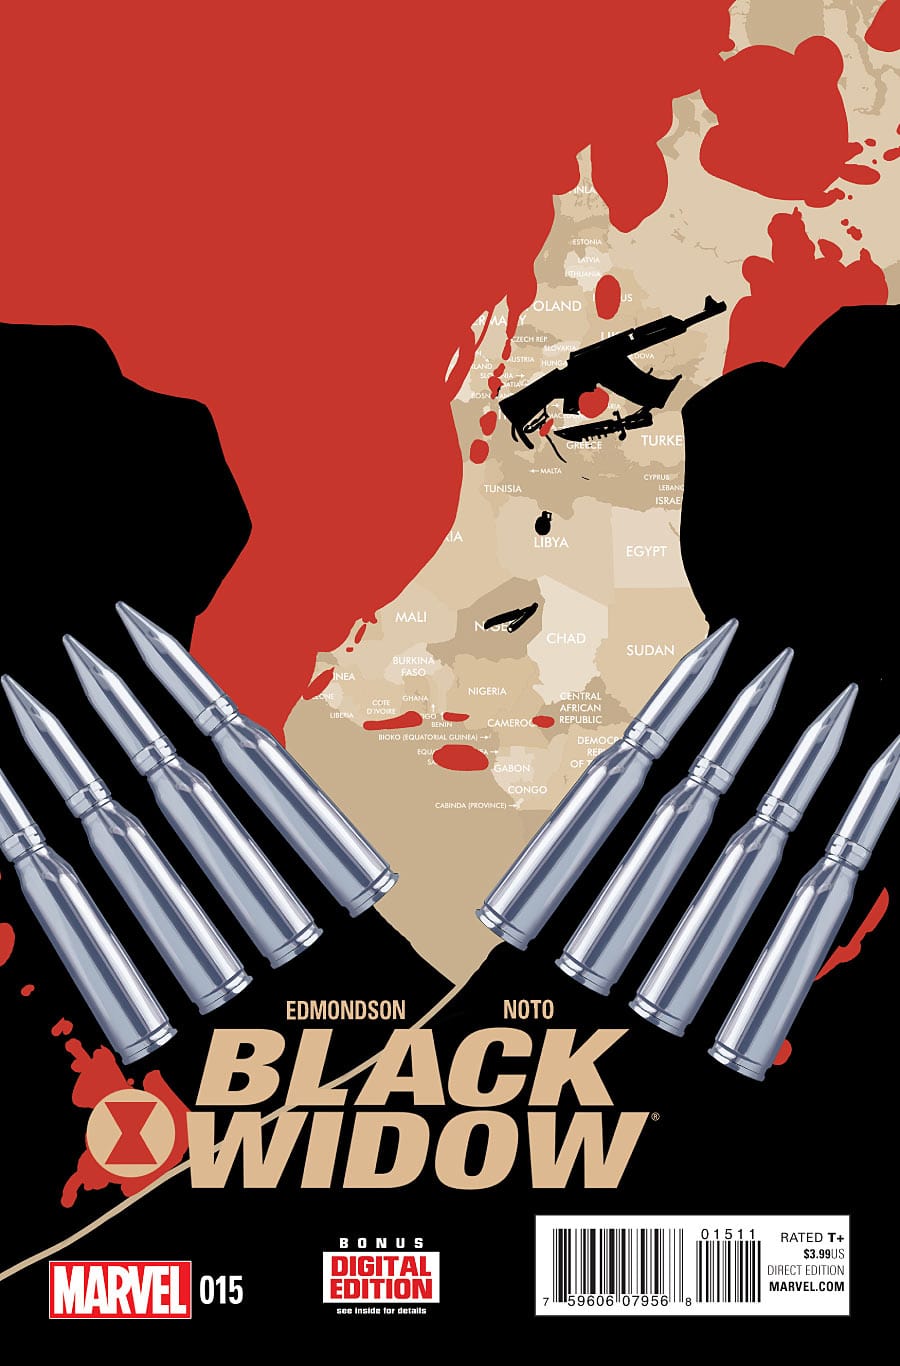 Judging by the Cover - Our favorite Black Widow covers of all time